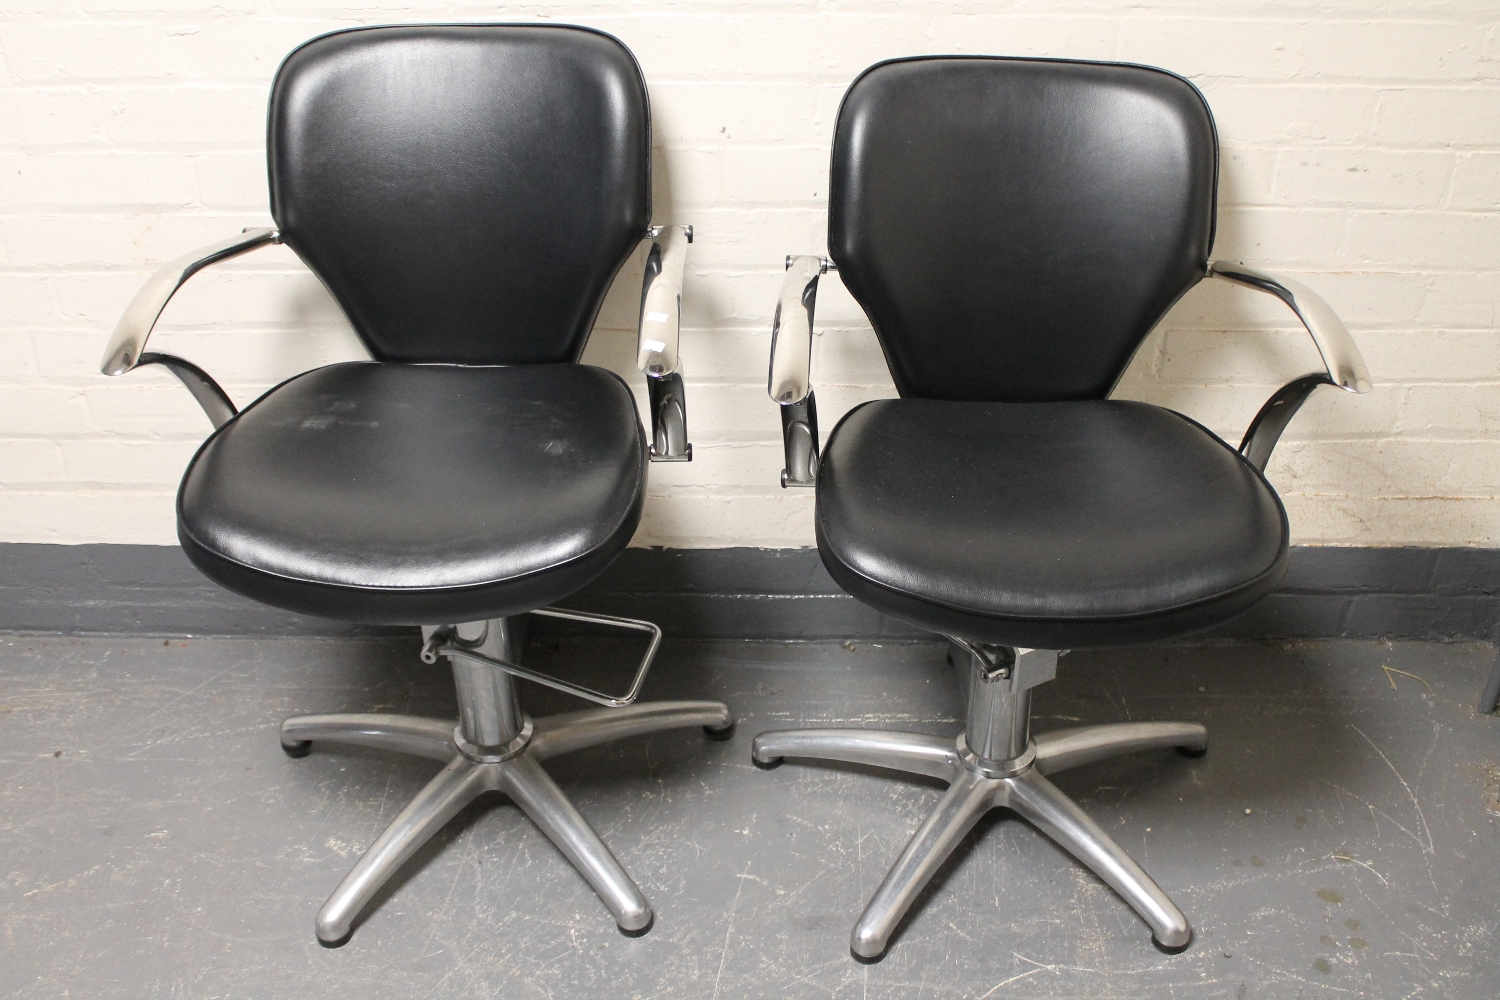 A pair of black vinyl and metal hydraulic barber's chairs